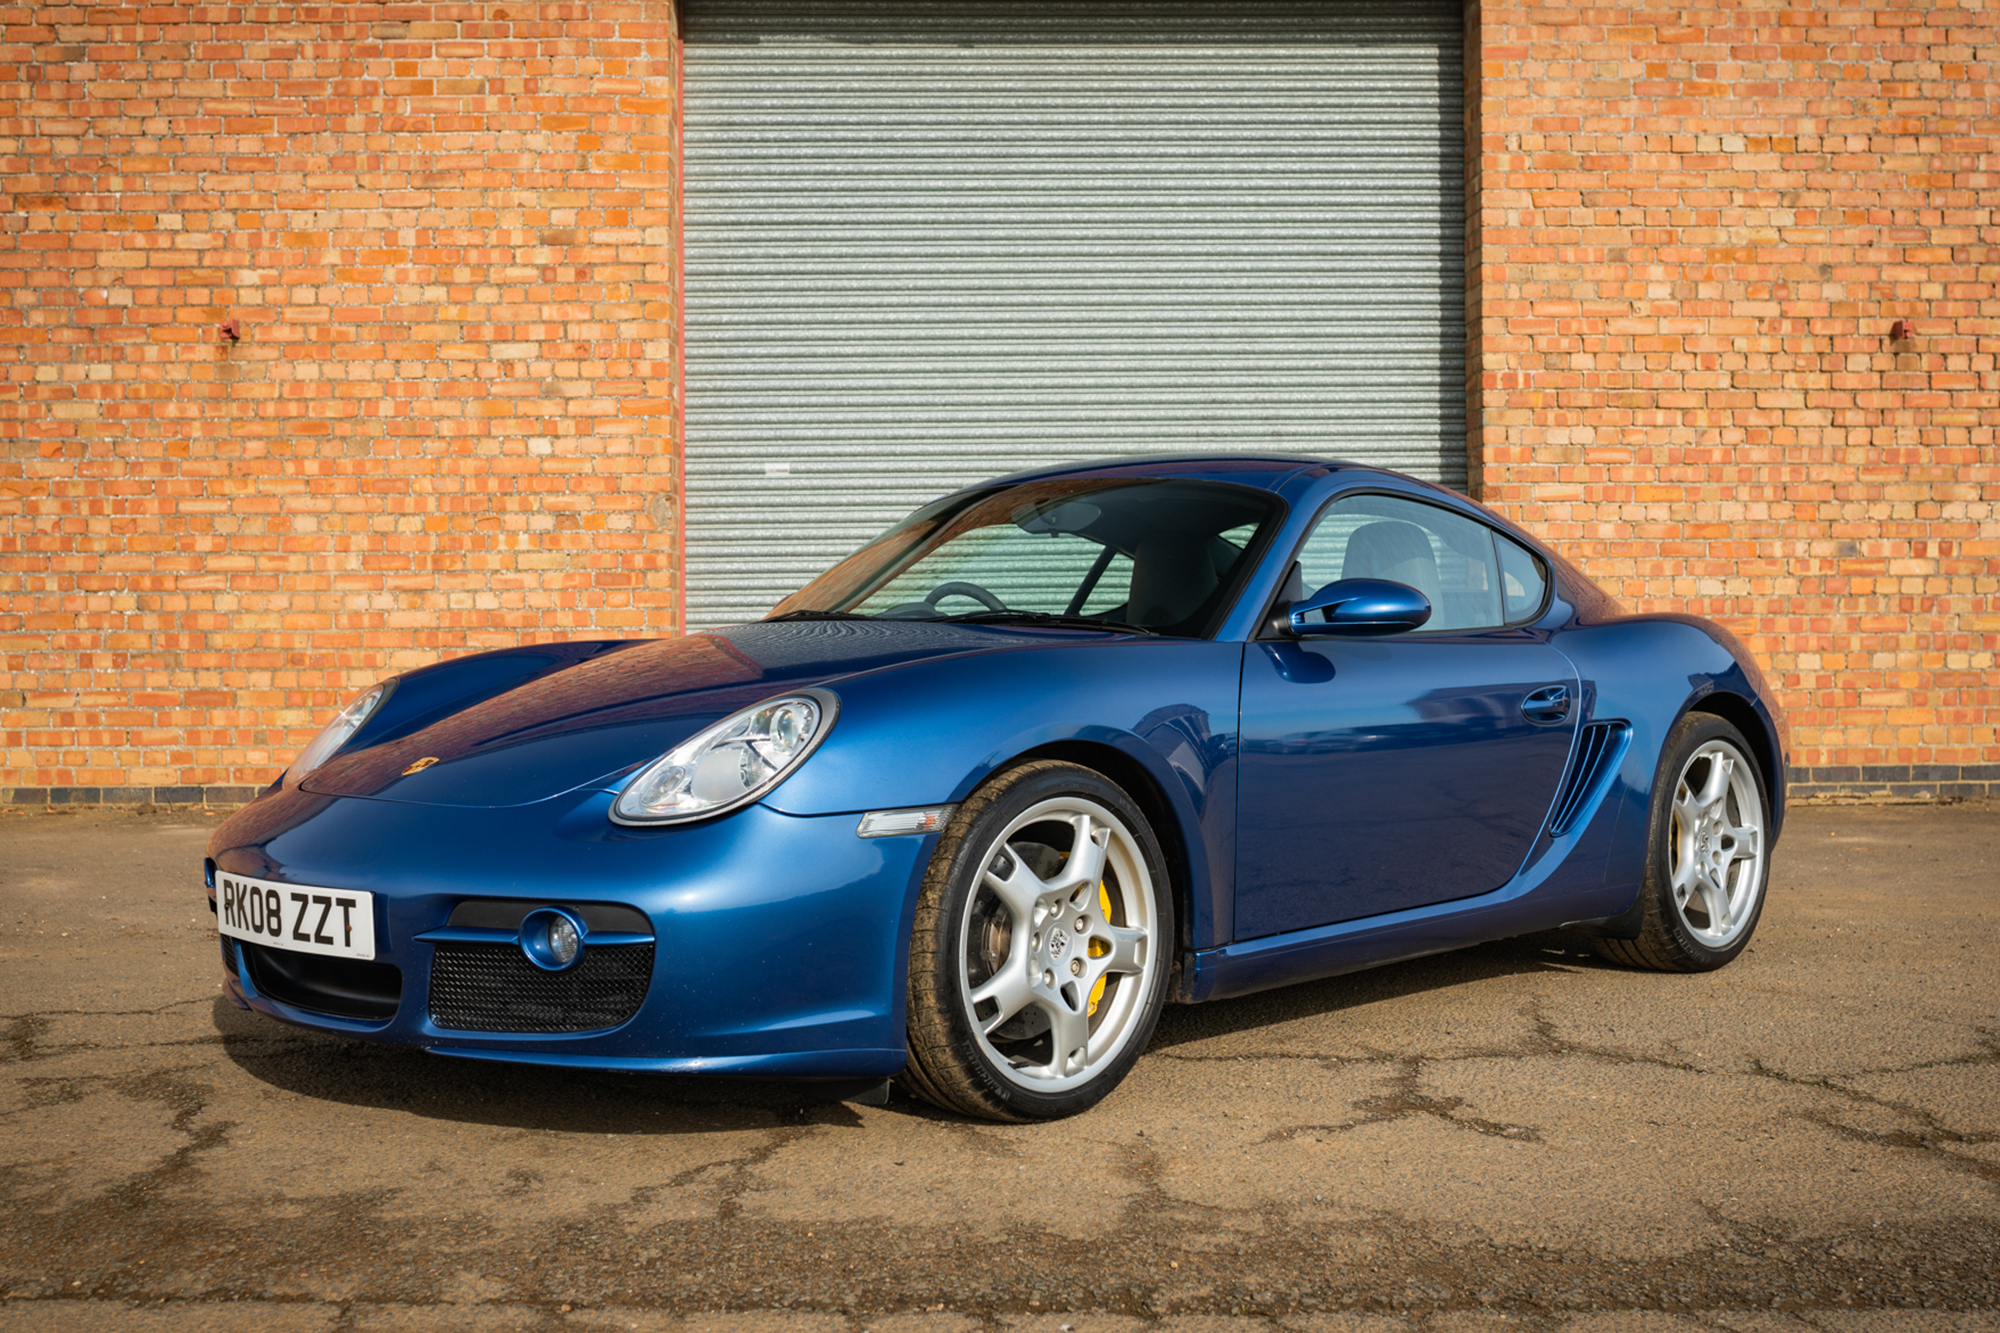 2008 PORSCHE (987) CAYMAN S for sale by auction in Grantham, Lincolnshire, United Kingdom photo